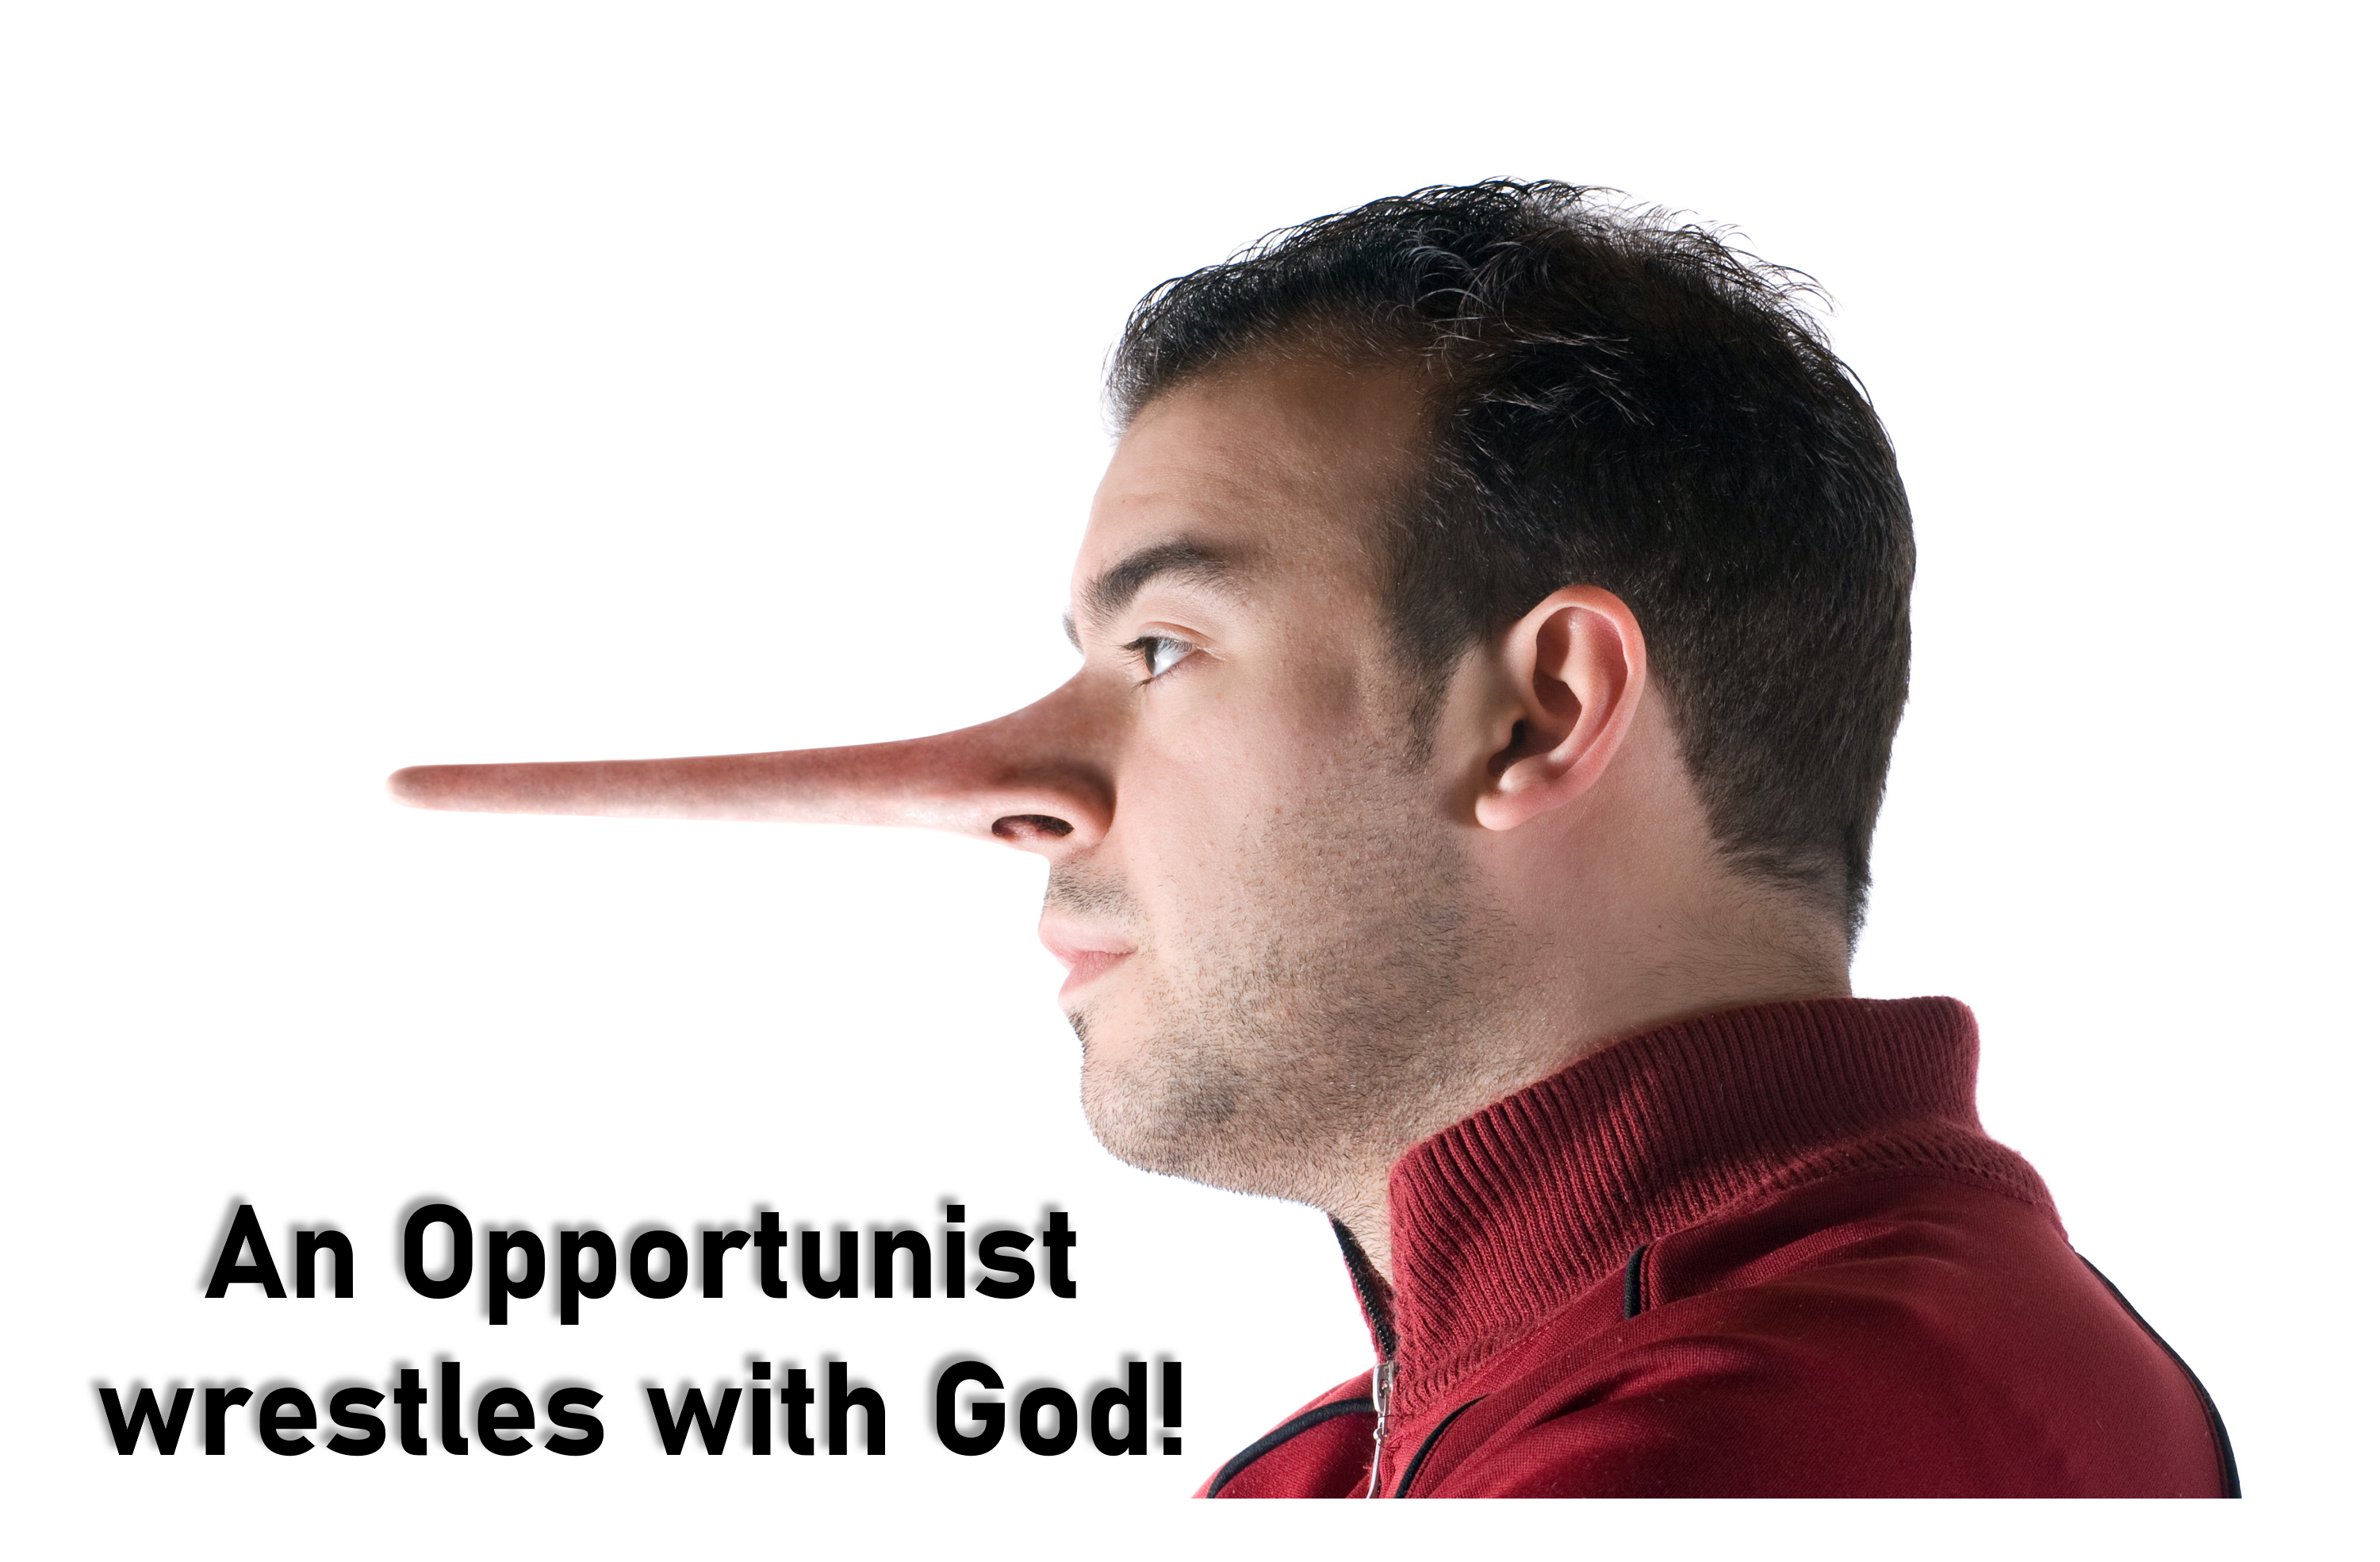 Jacob – An Opportunist wrestles with God [The Deceiver God Used]